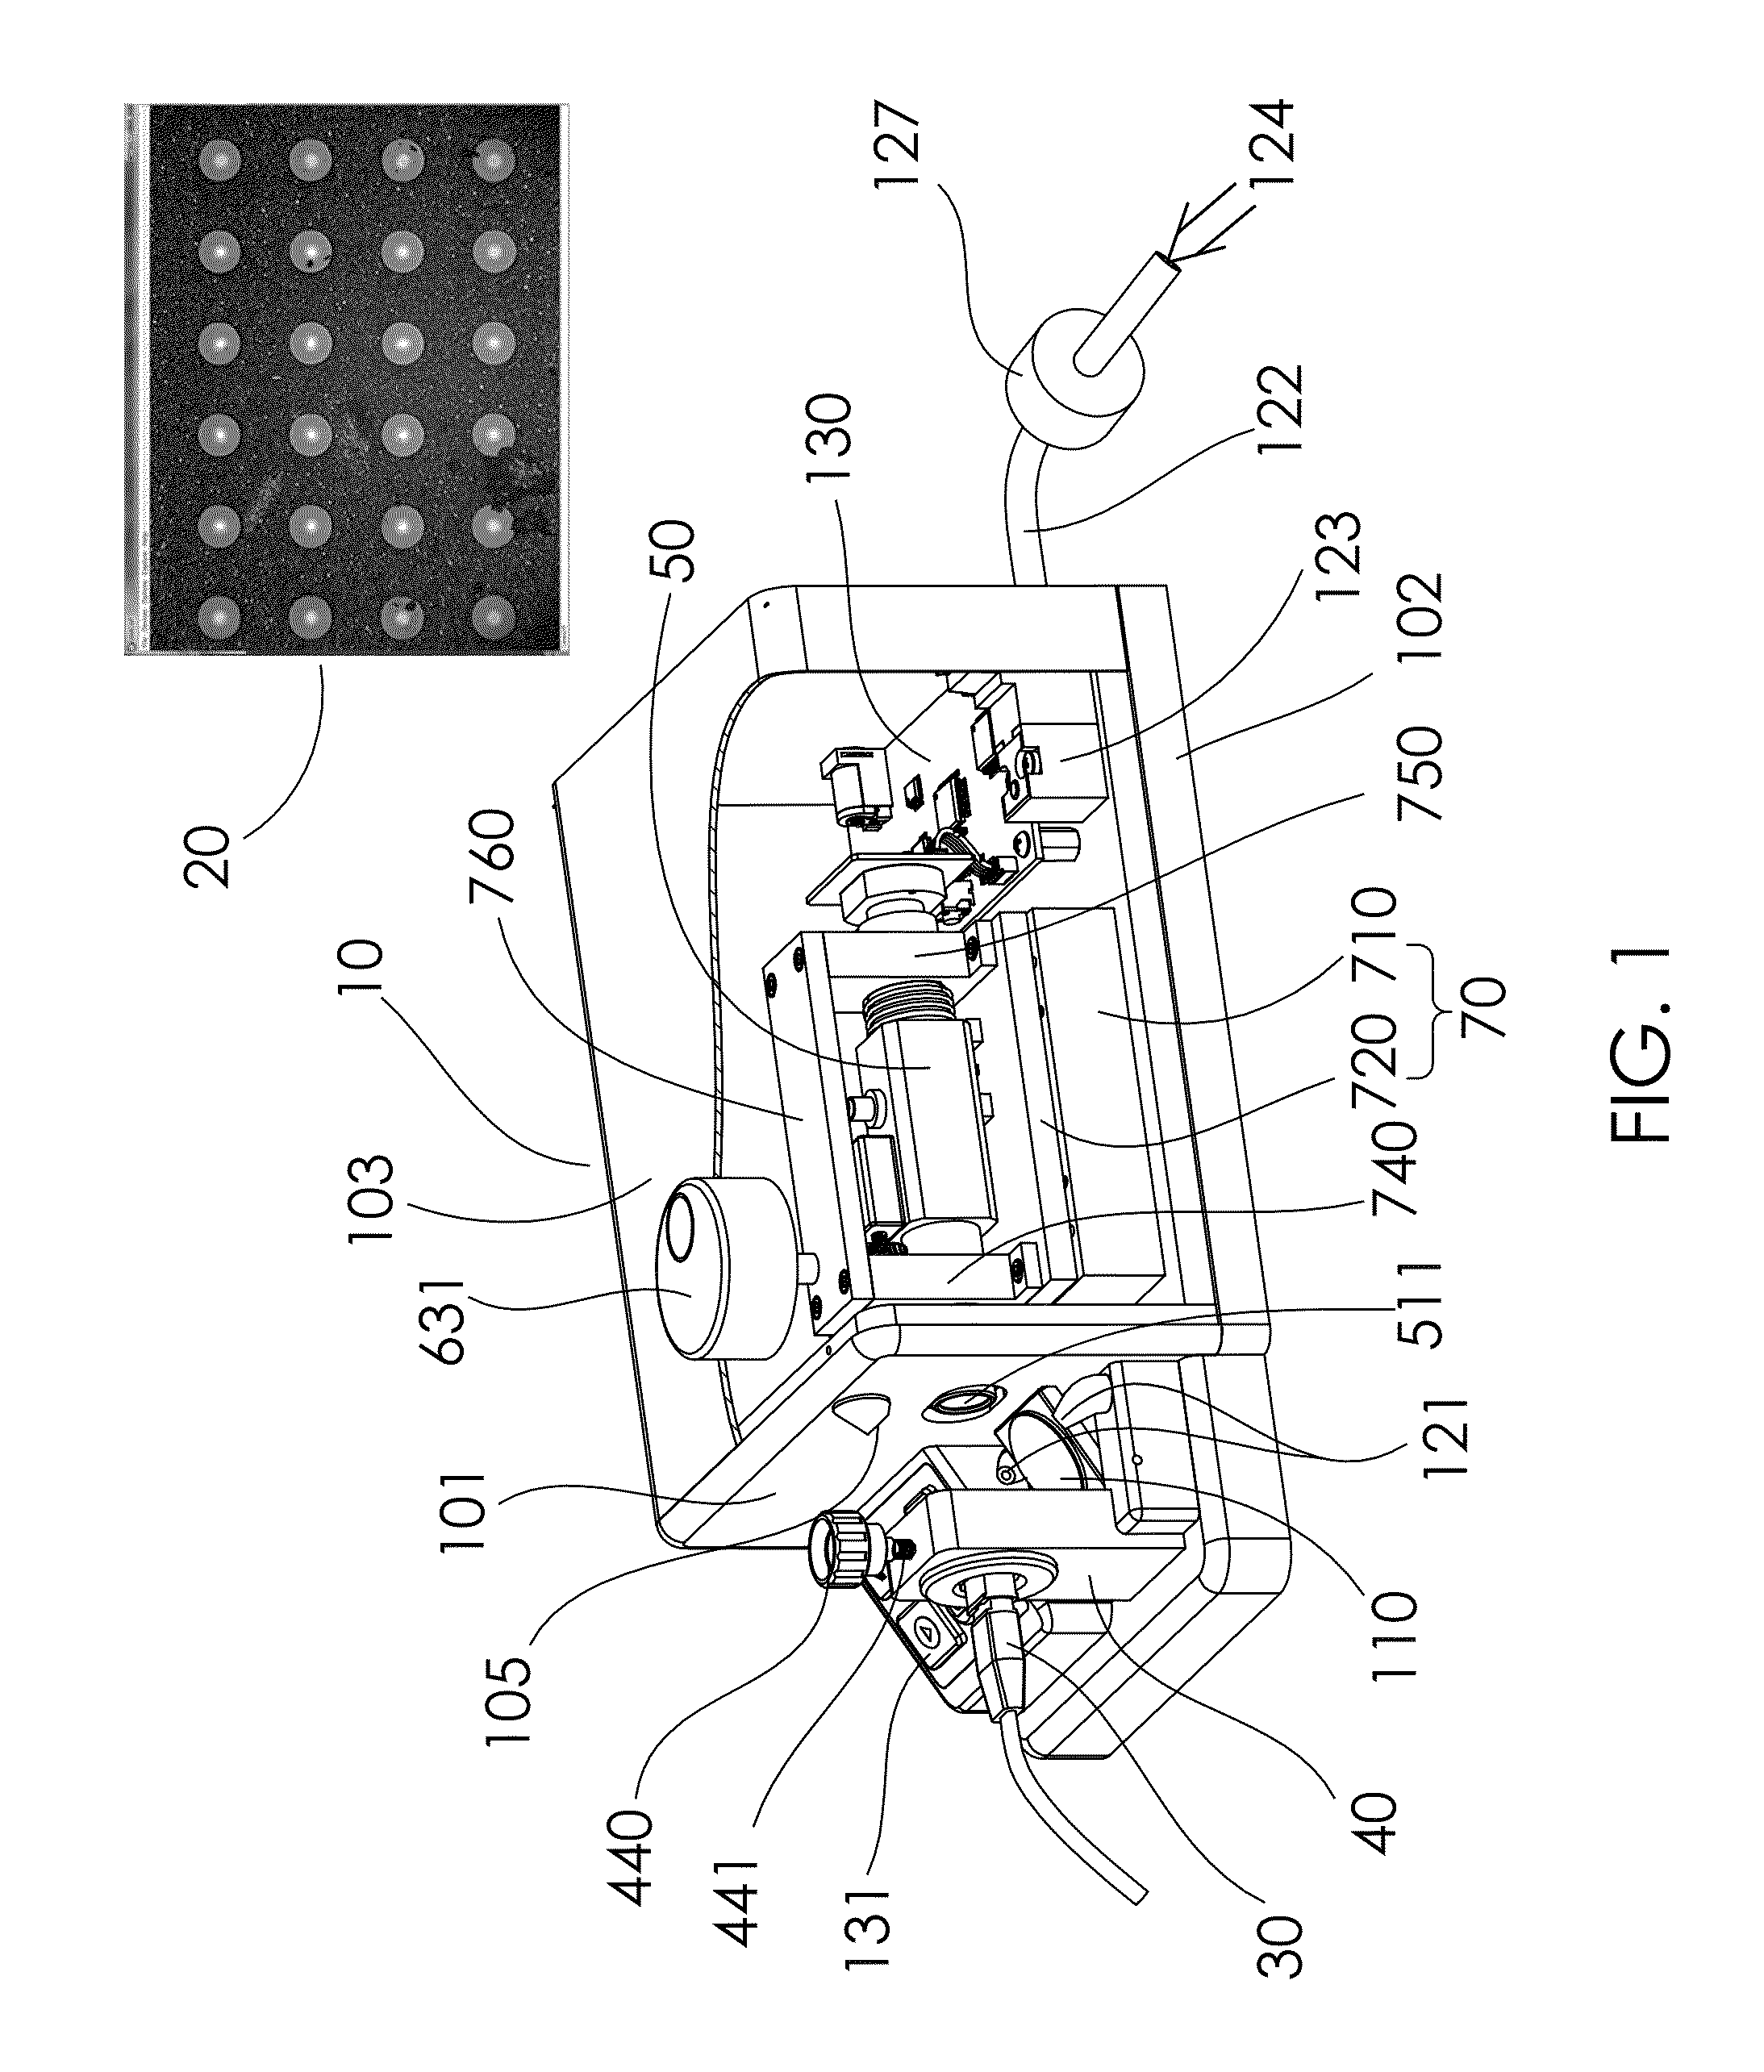 Apparatus for simultaneously inspecting and cleaning fiber connector